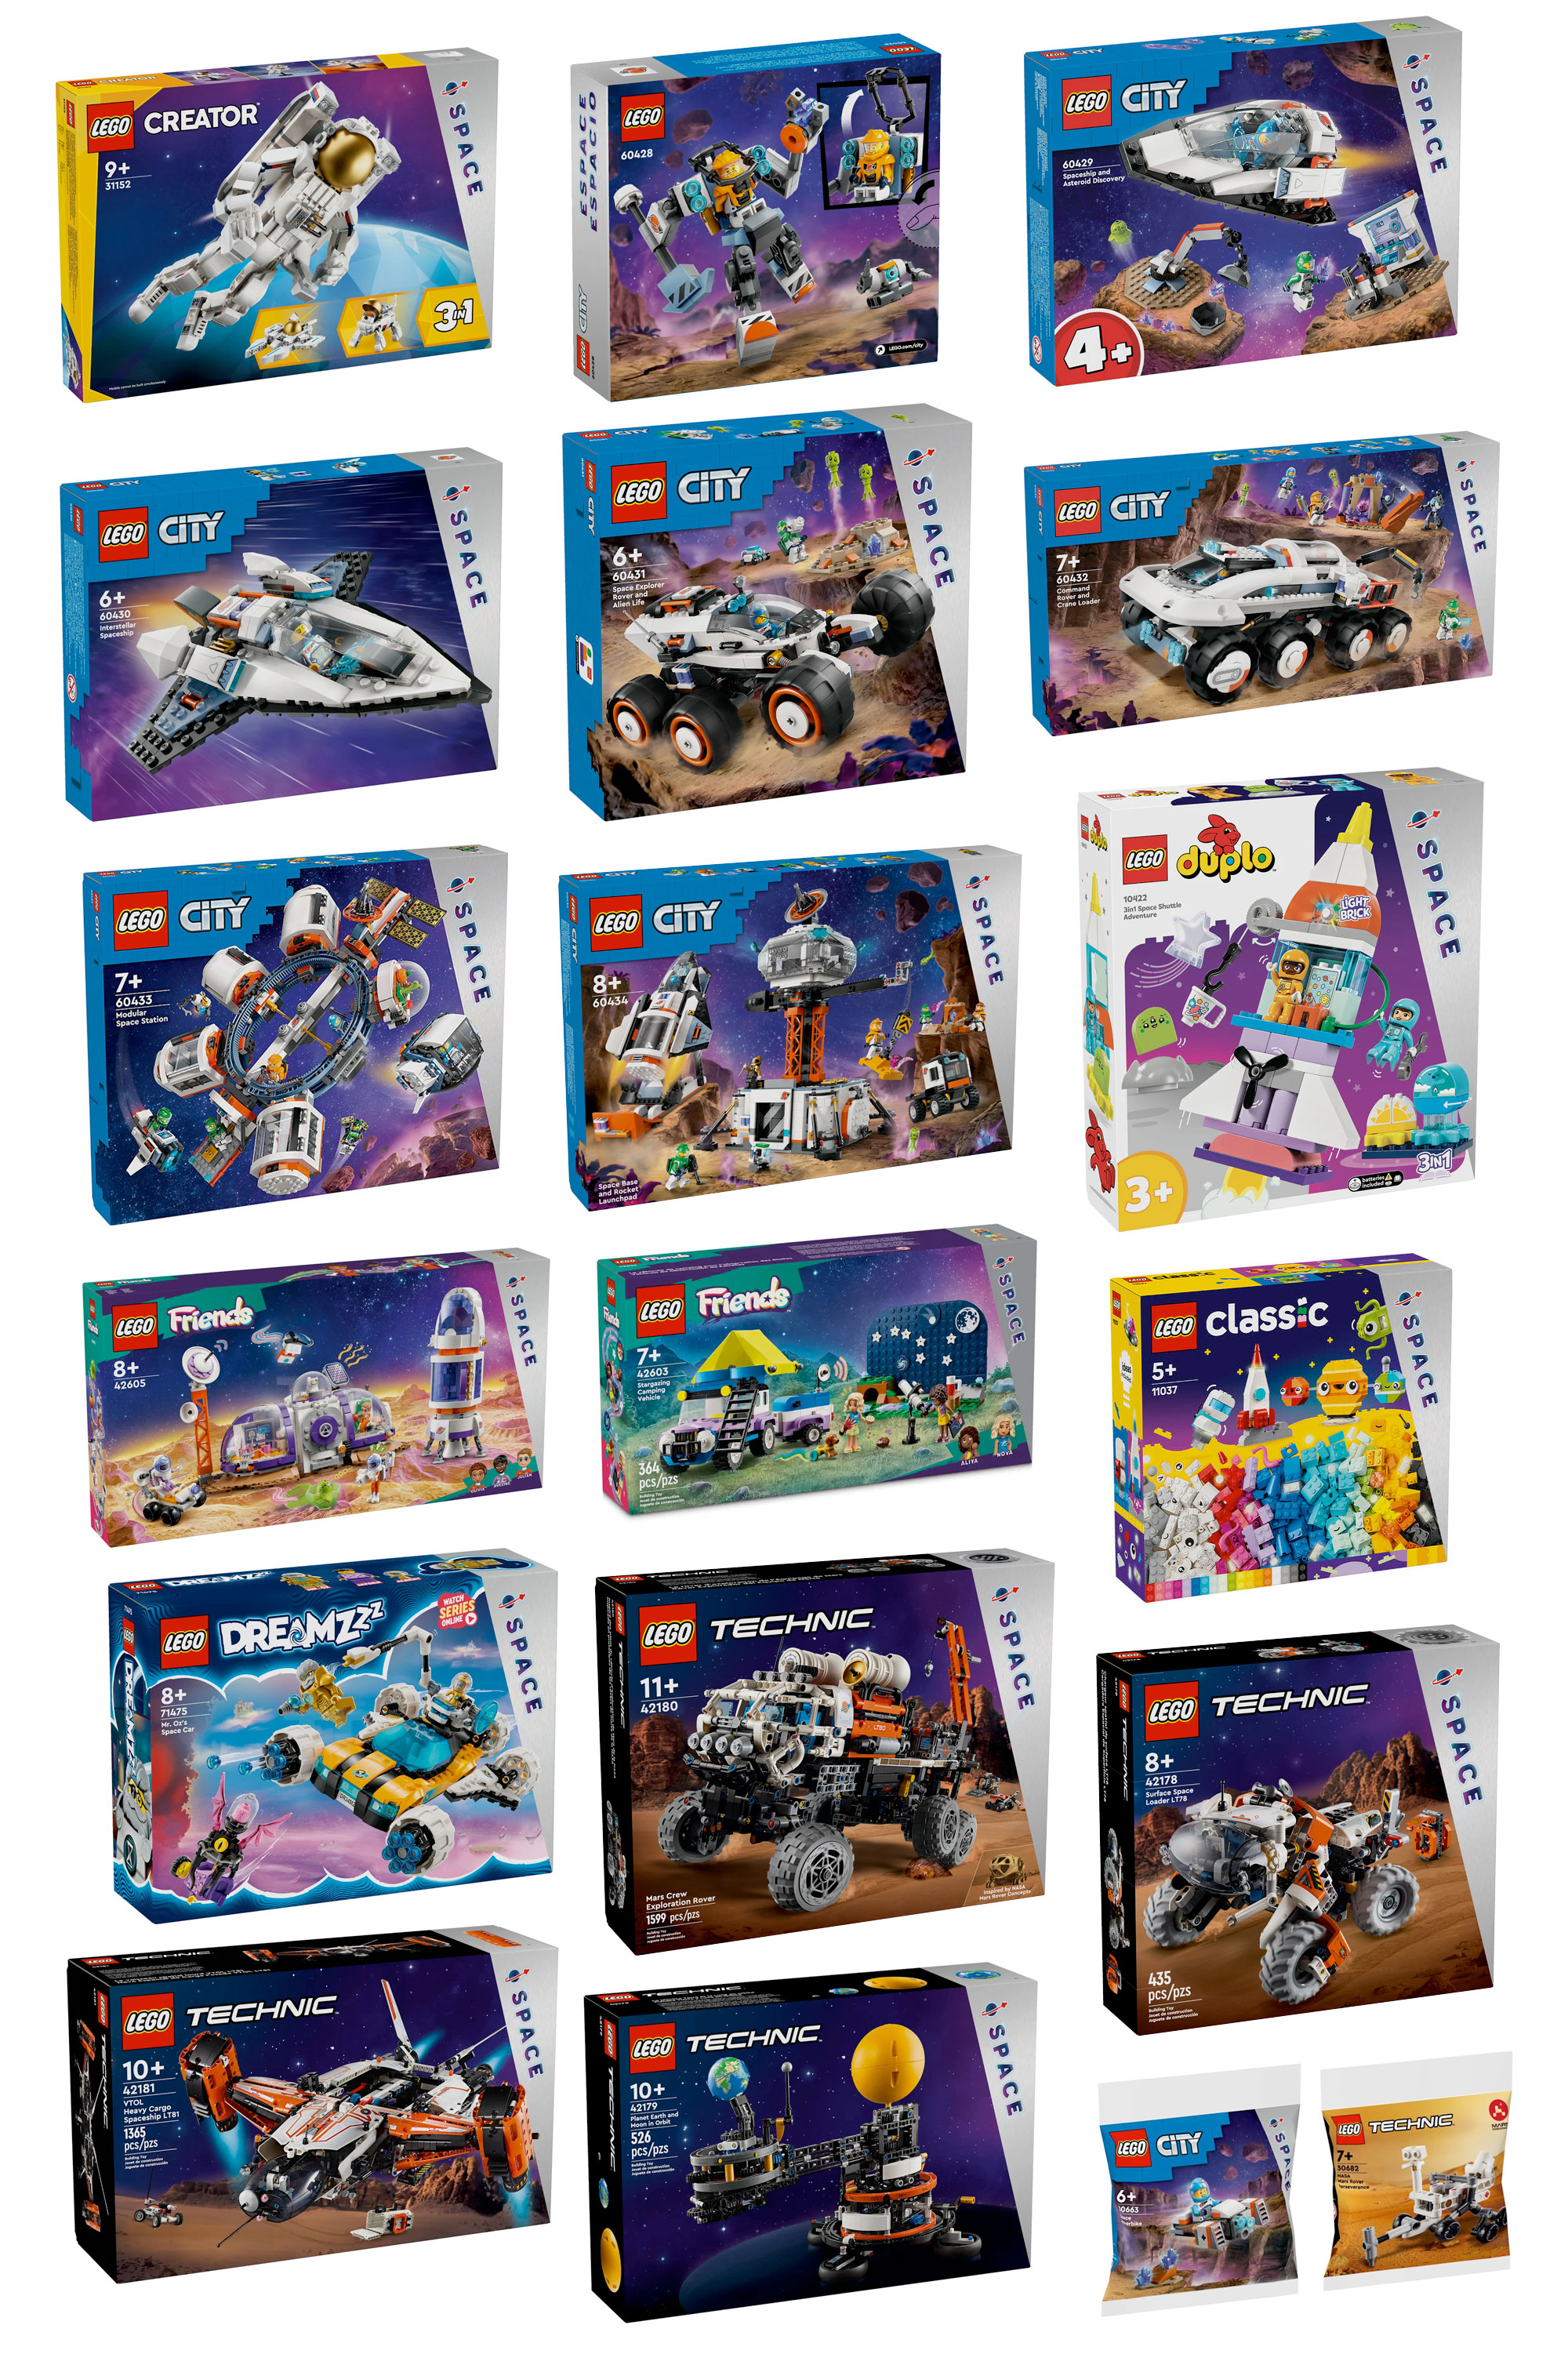 New year, new LEGO 'Space' sets: Mars bases, rockets and rovers span themes